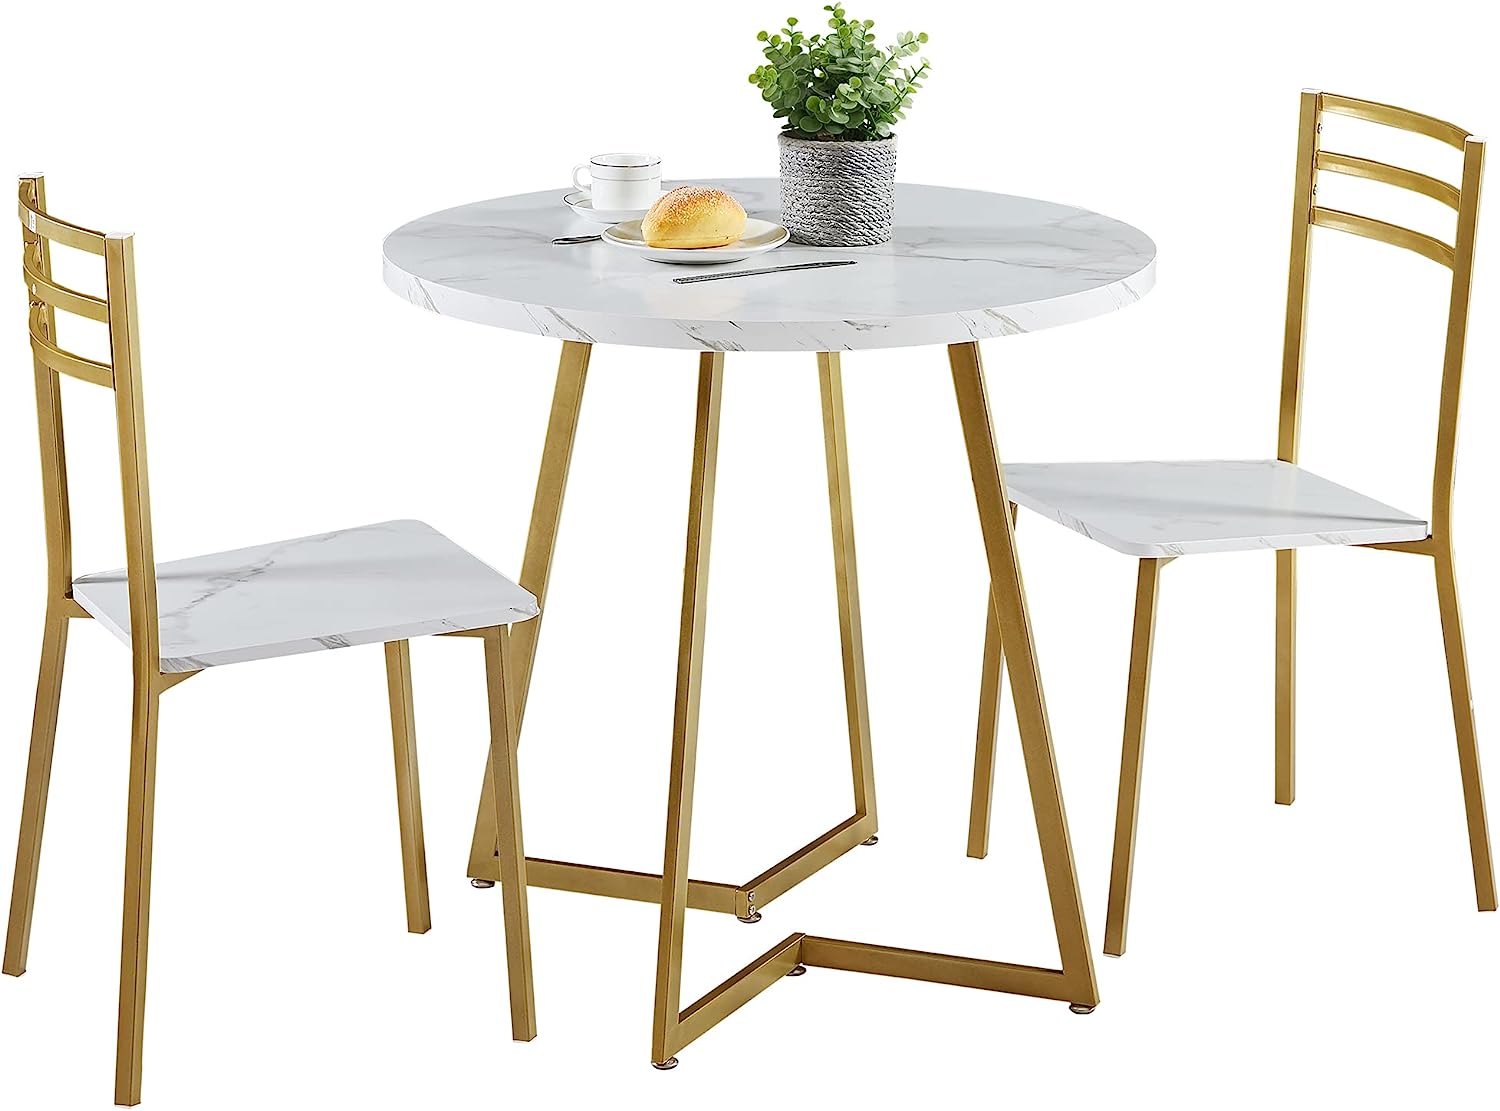 VECELO 3 Piece Kitchen Dining Room Set, Marbling Tabletop with Gold Steel Frame Round Table